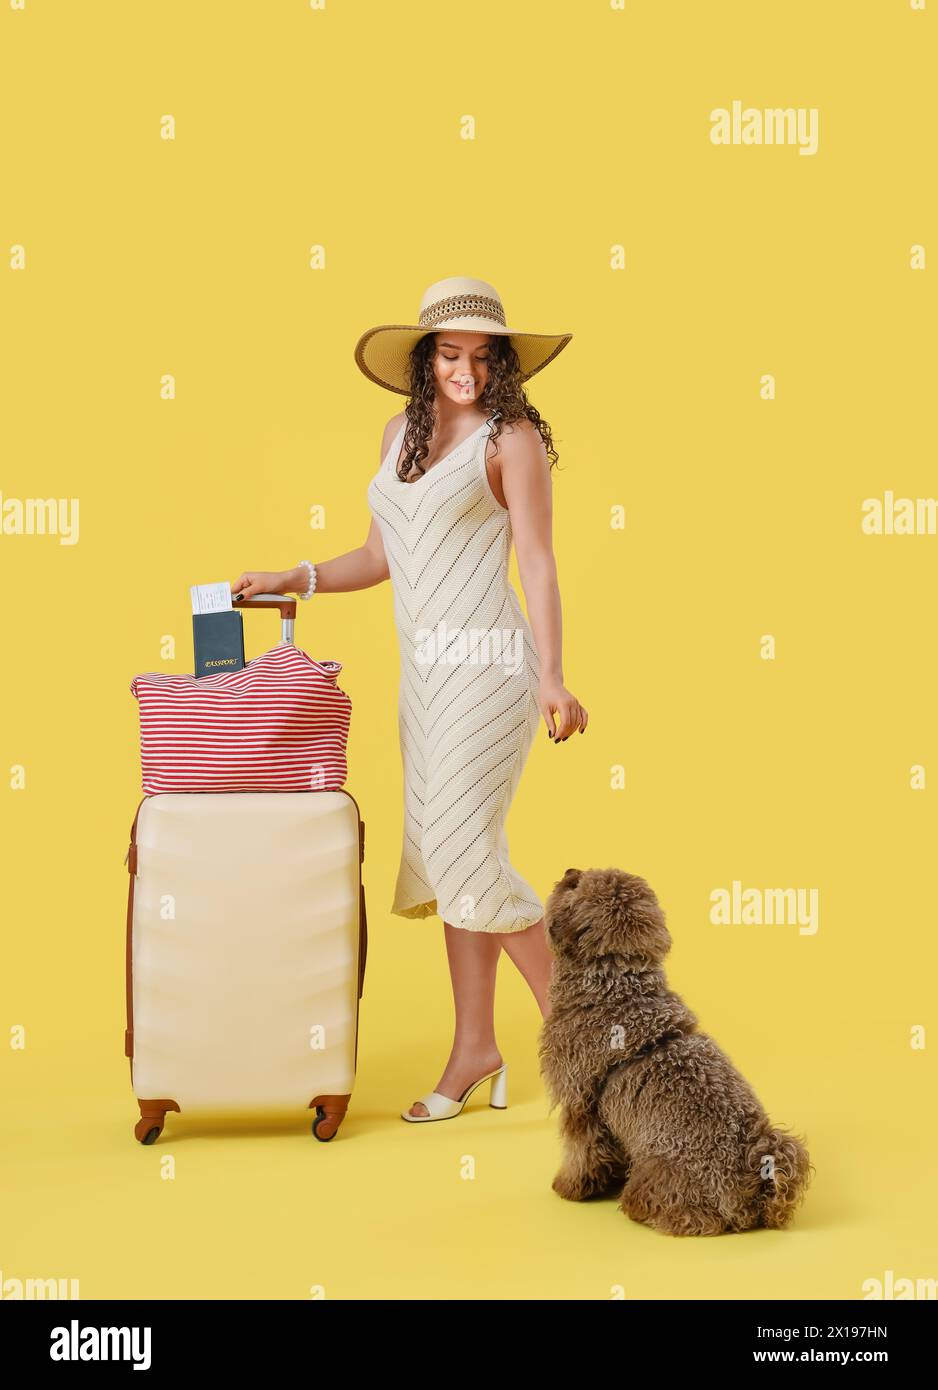 Female traveler with suitcase and cute poodle on yellow background Stock Photo